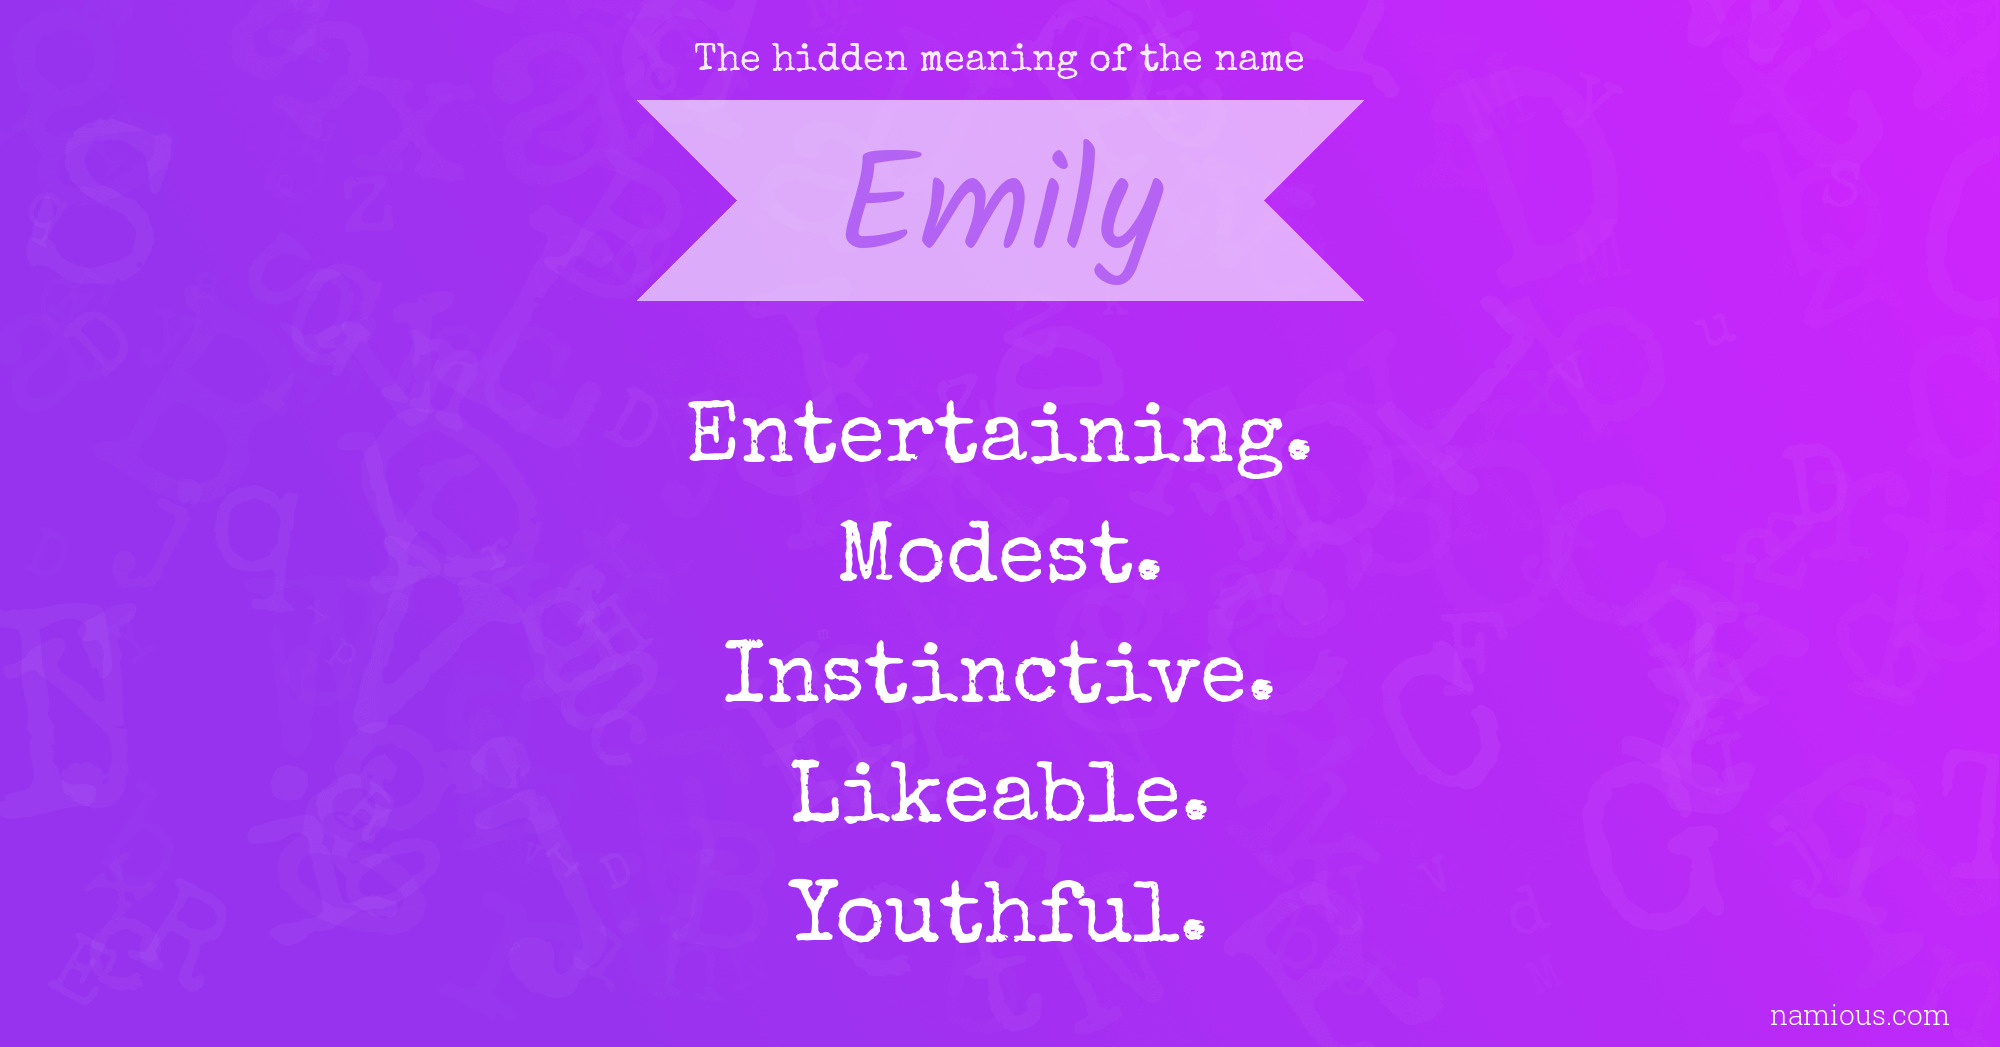 The hidden meaning of the name Emily